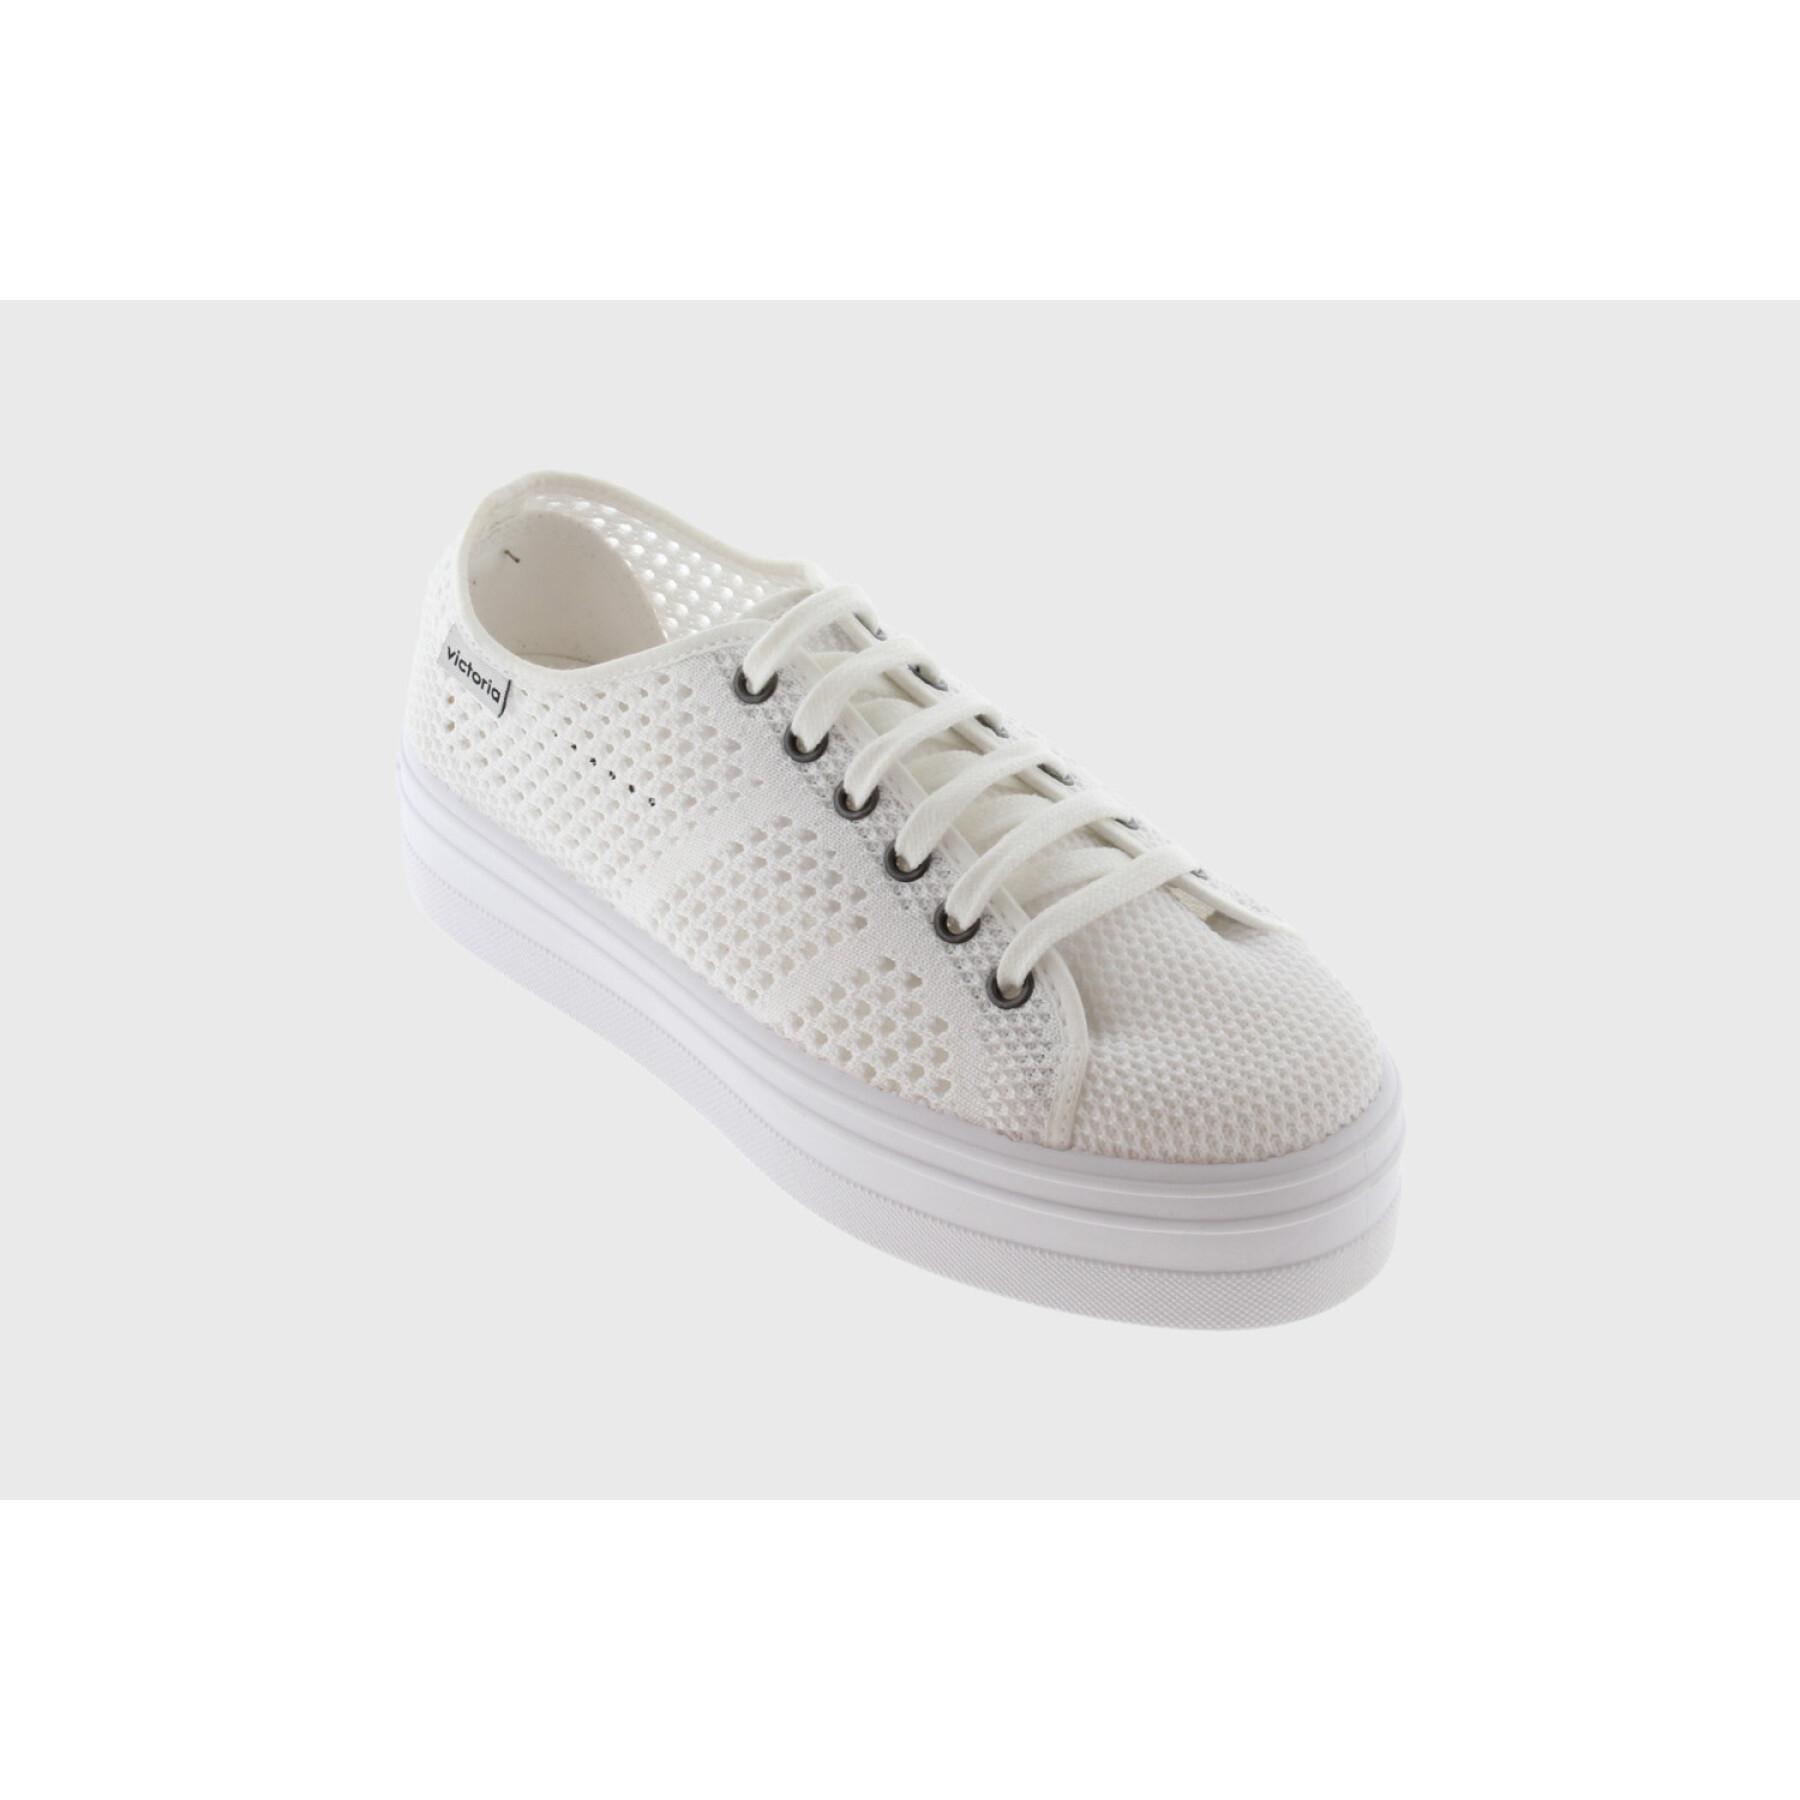 Women's shoes Victoria barcelona plate-forme